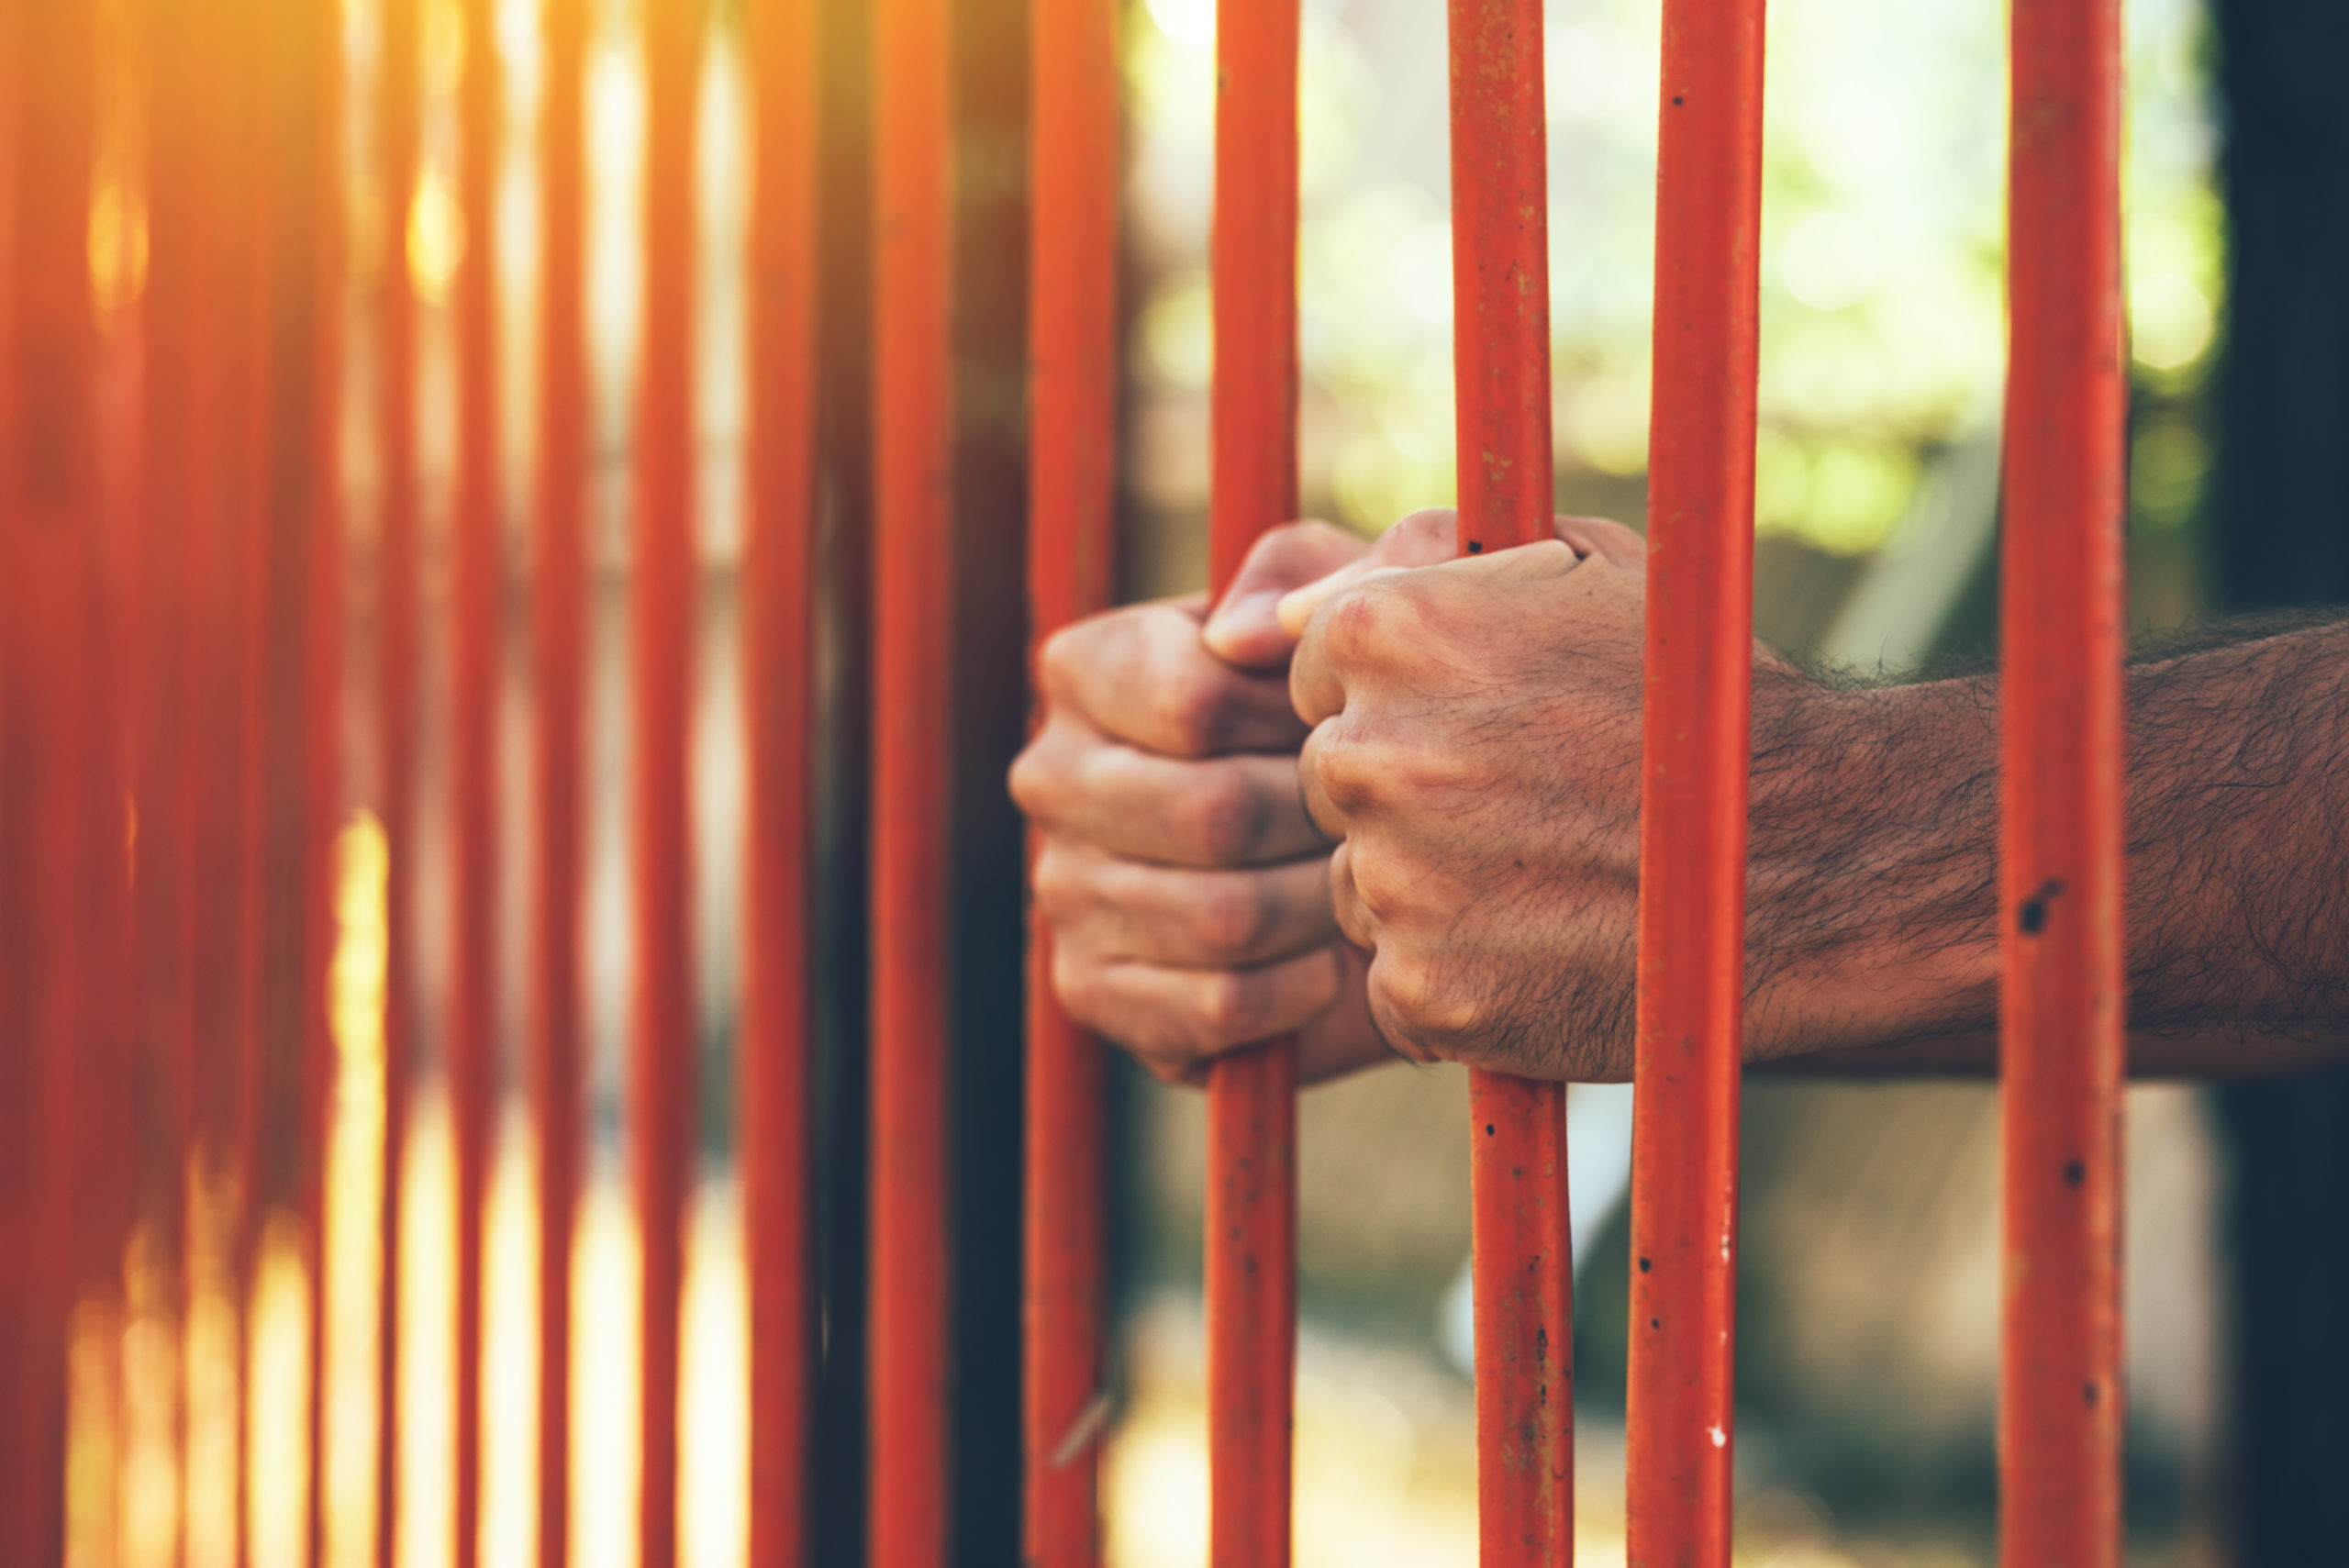 How To Recover From the Trauma of Being Incarcerated